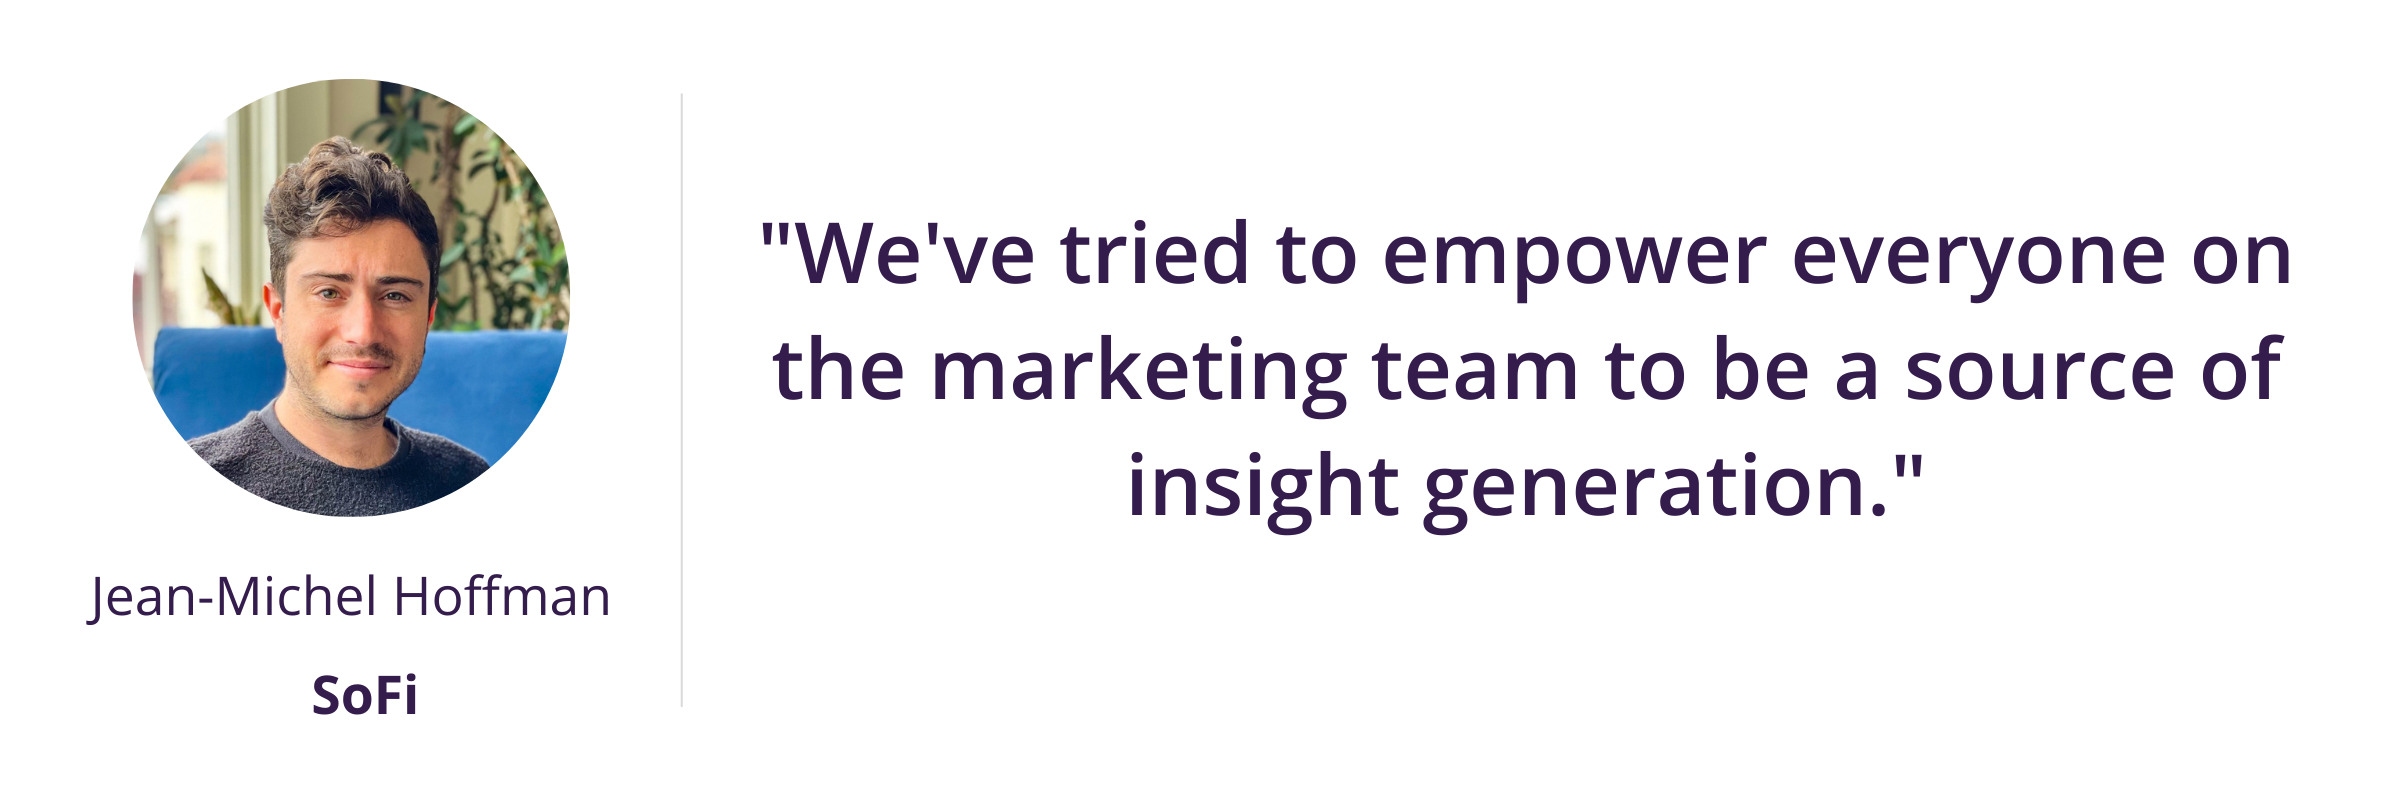 We've tried to empower everyone on the marketing team to be a source of insight generation.